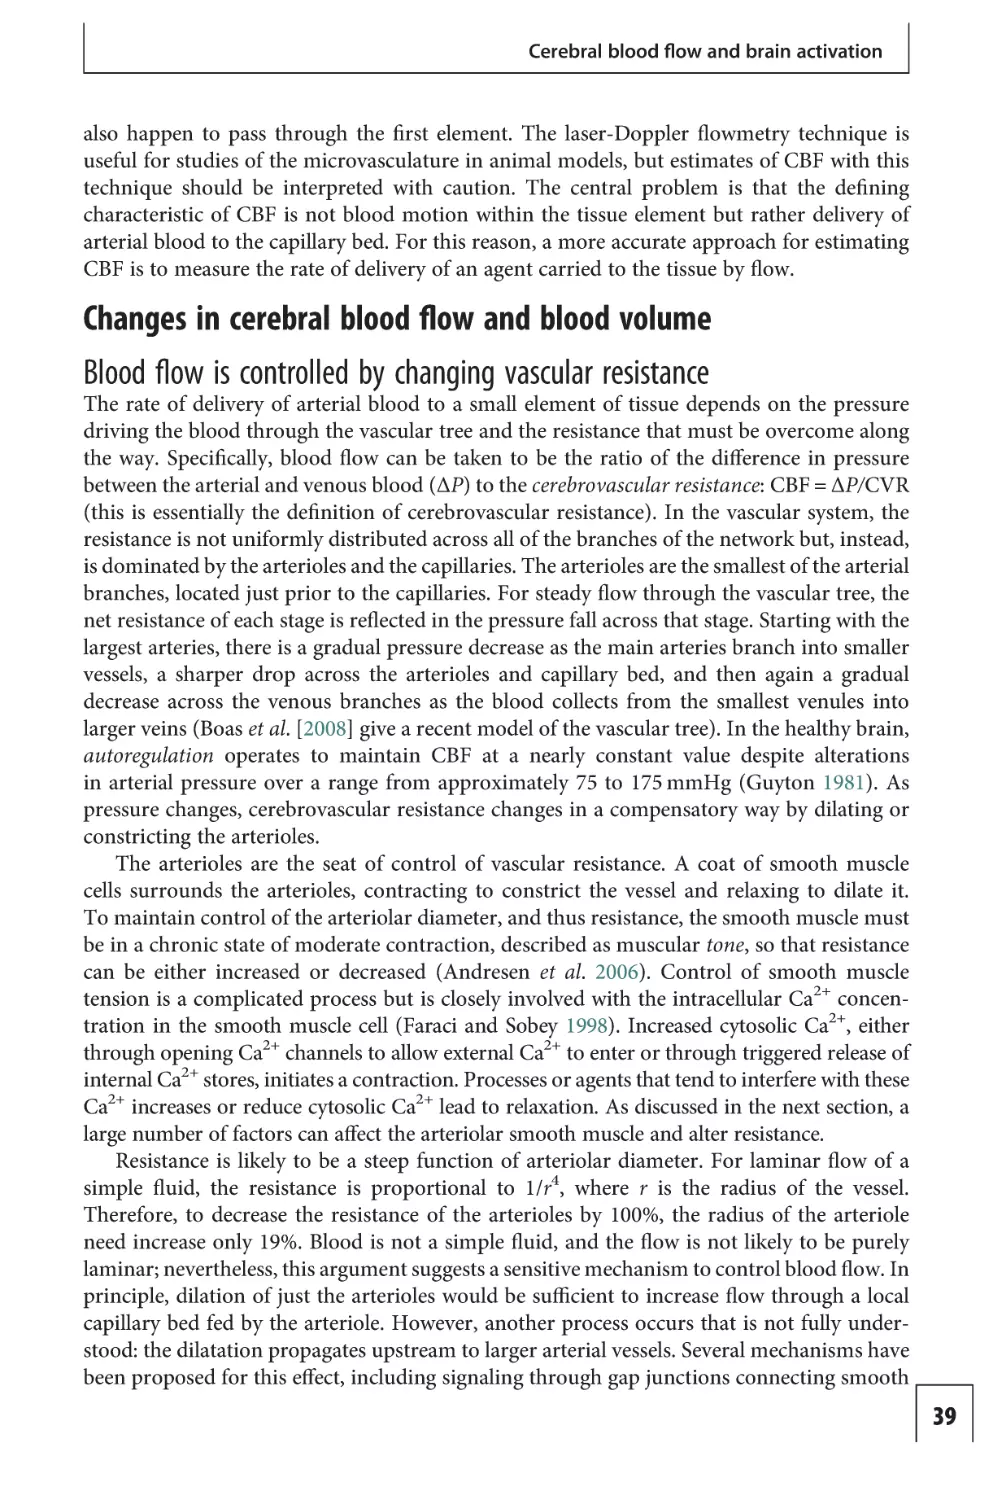 Changes in cerebral blood flow and blood volume
Blood flow is controlled by changing vascular resistance